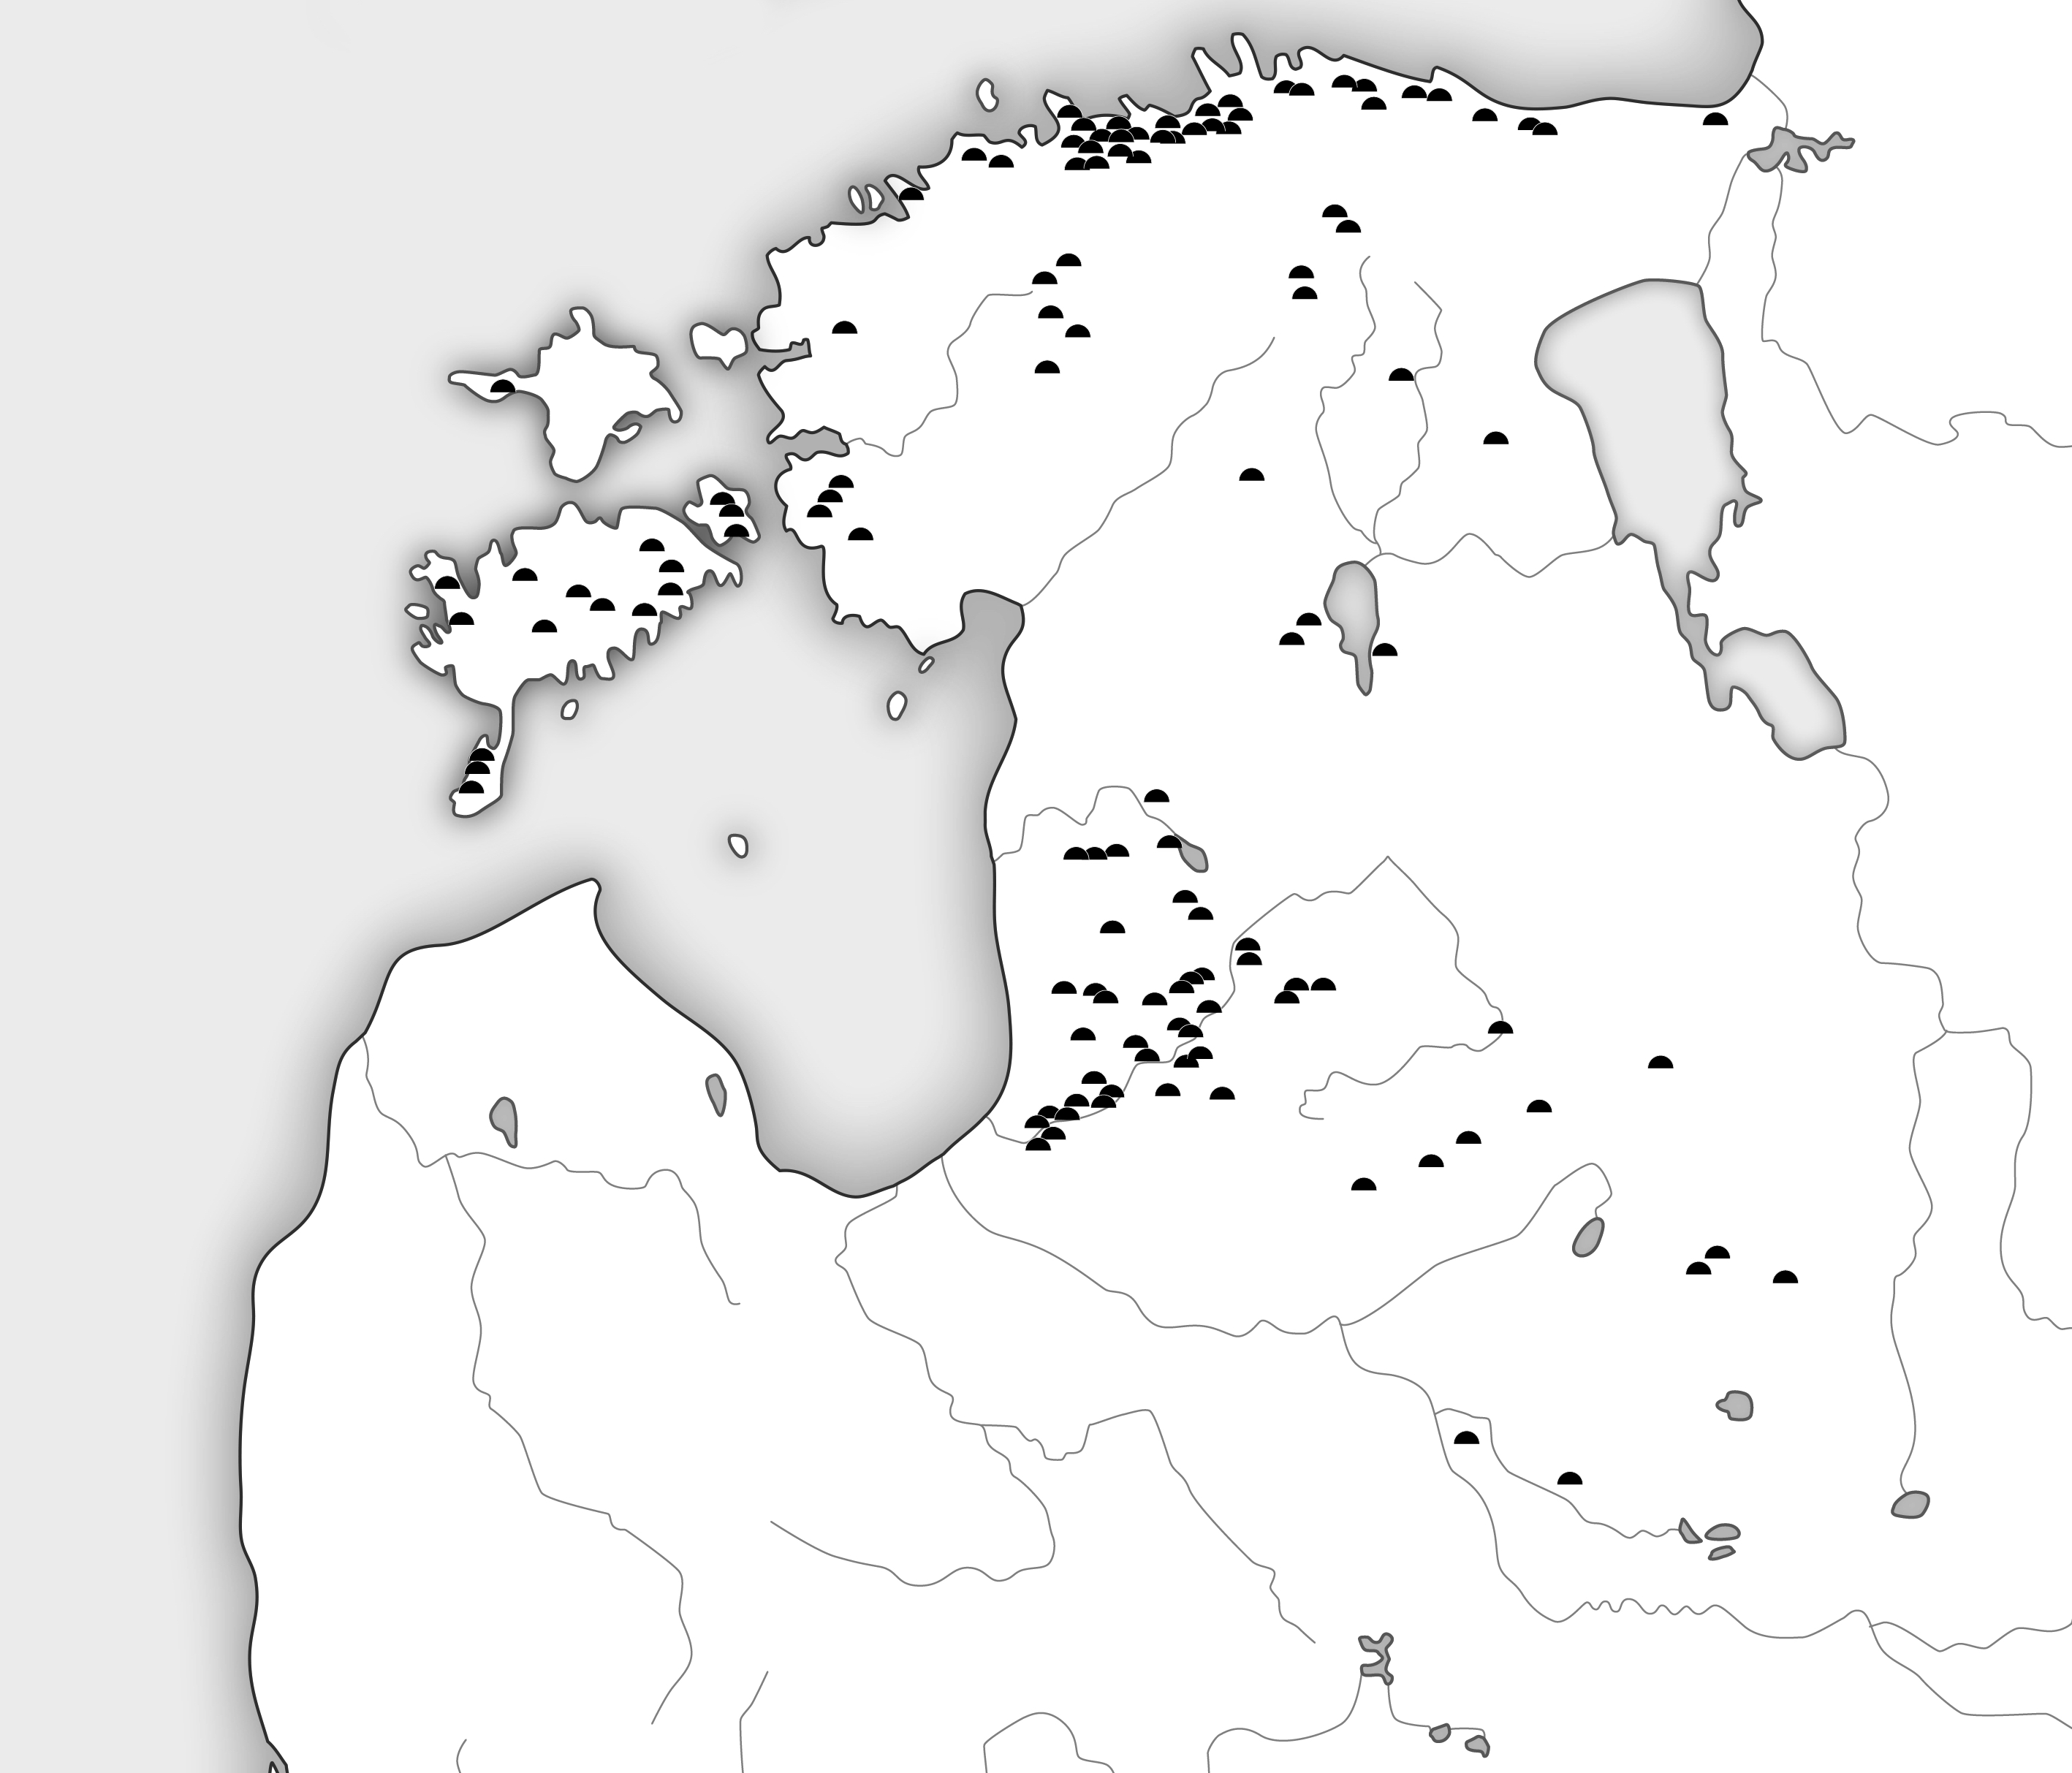 The sites of the stone cist graves marked on the map in Estonia and Latvia -  located mainly near the coast of Northern Estonia, on the coast of Western Estonia (around Lihula), Saaremaa. In Latvia, most of the stone cist graves are found on the west coast, in the area between the rivers Koiva and Salatsi. 